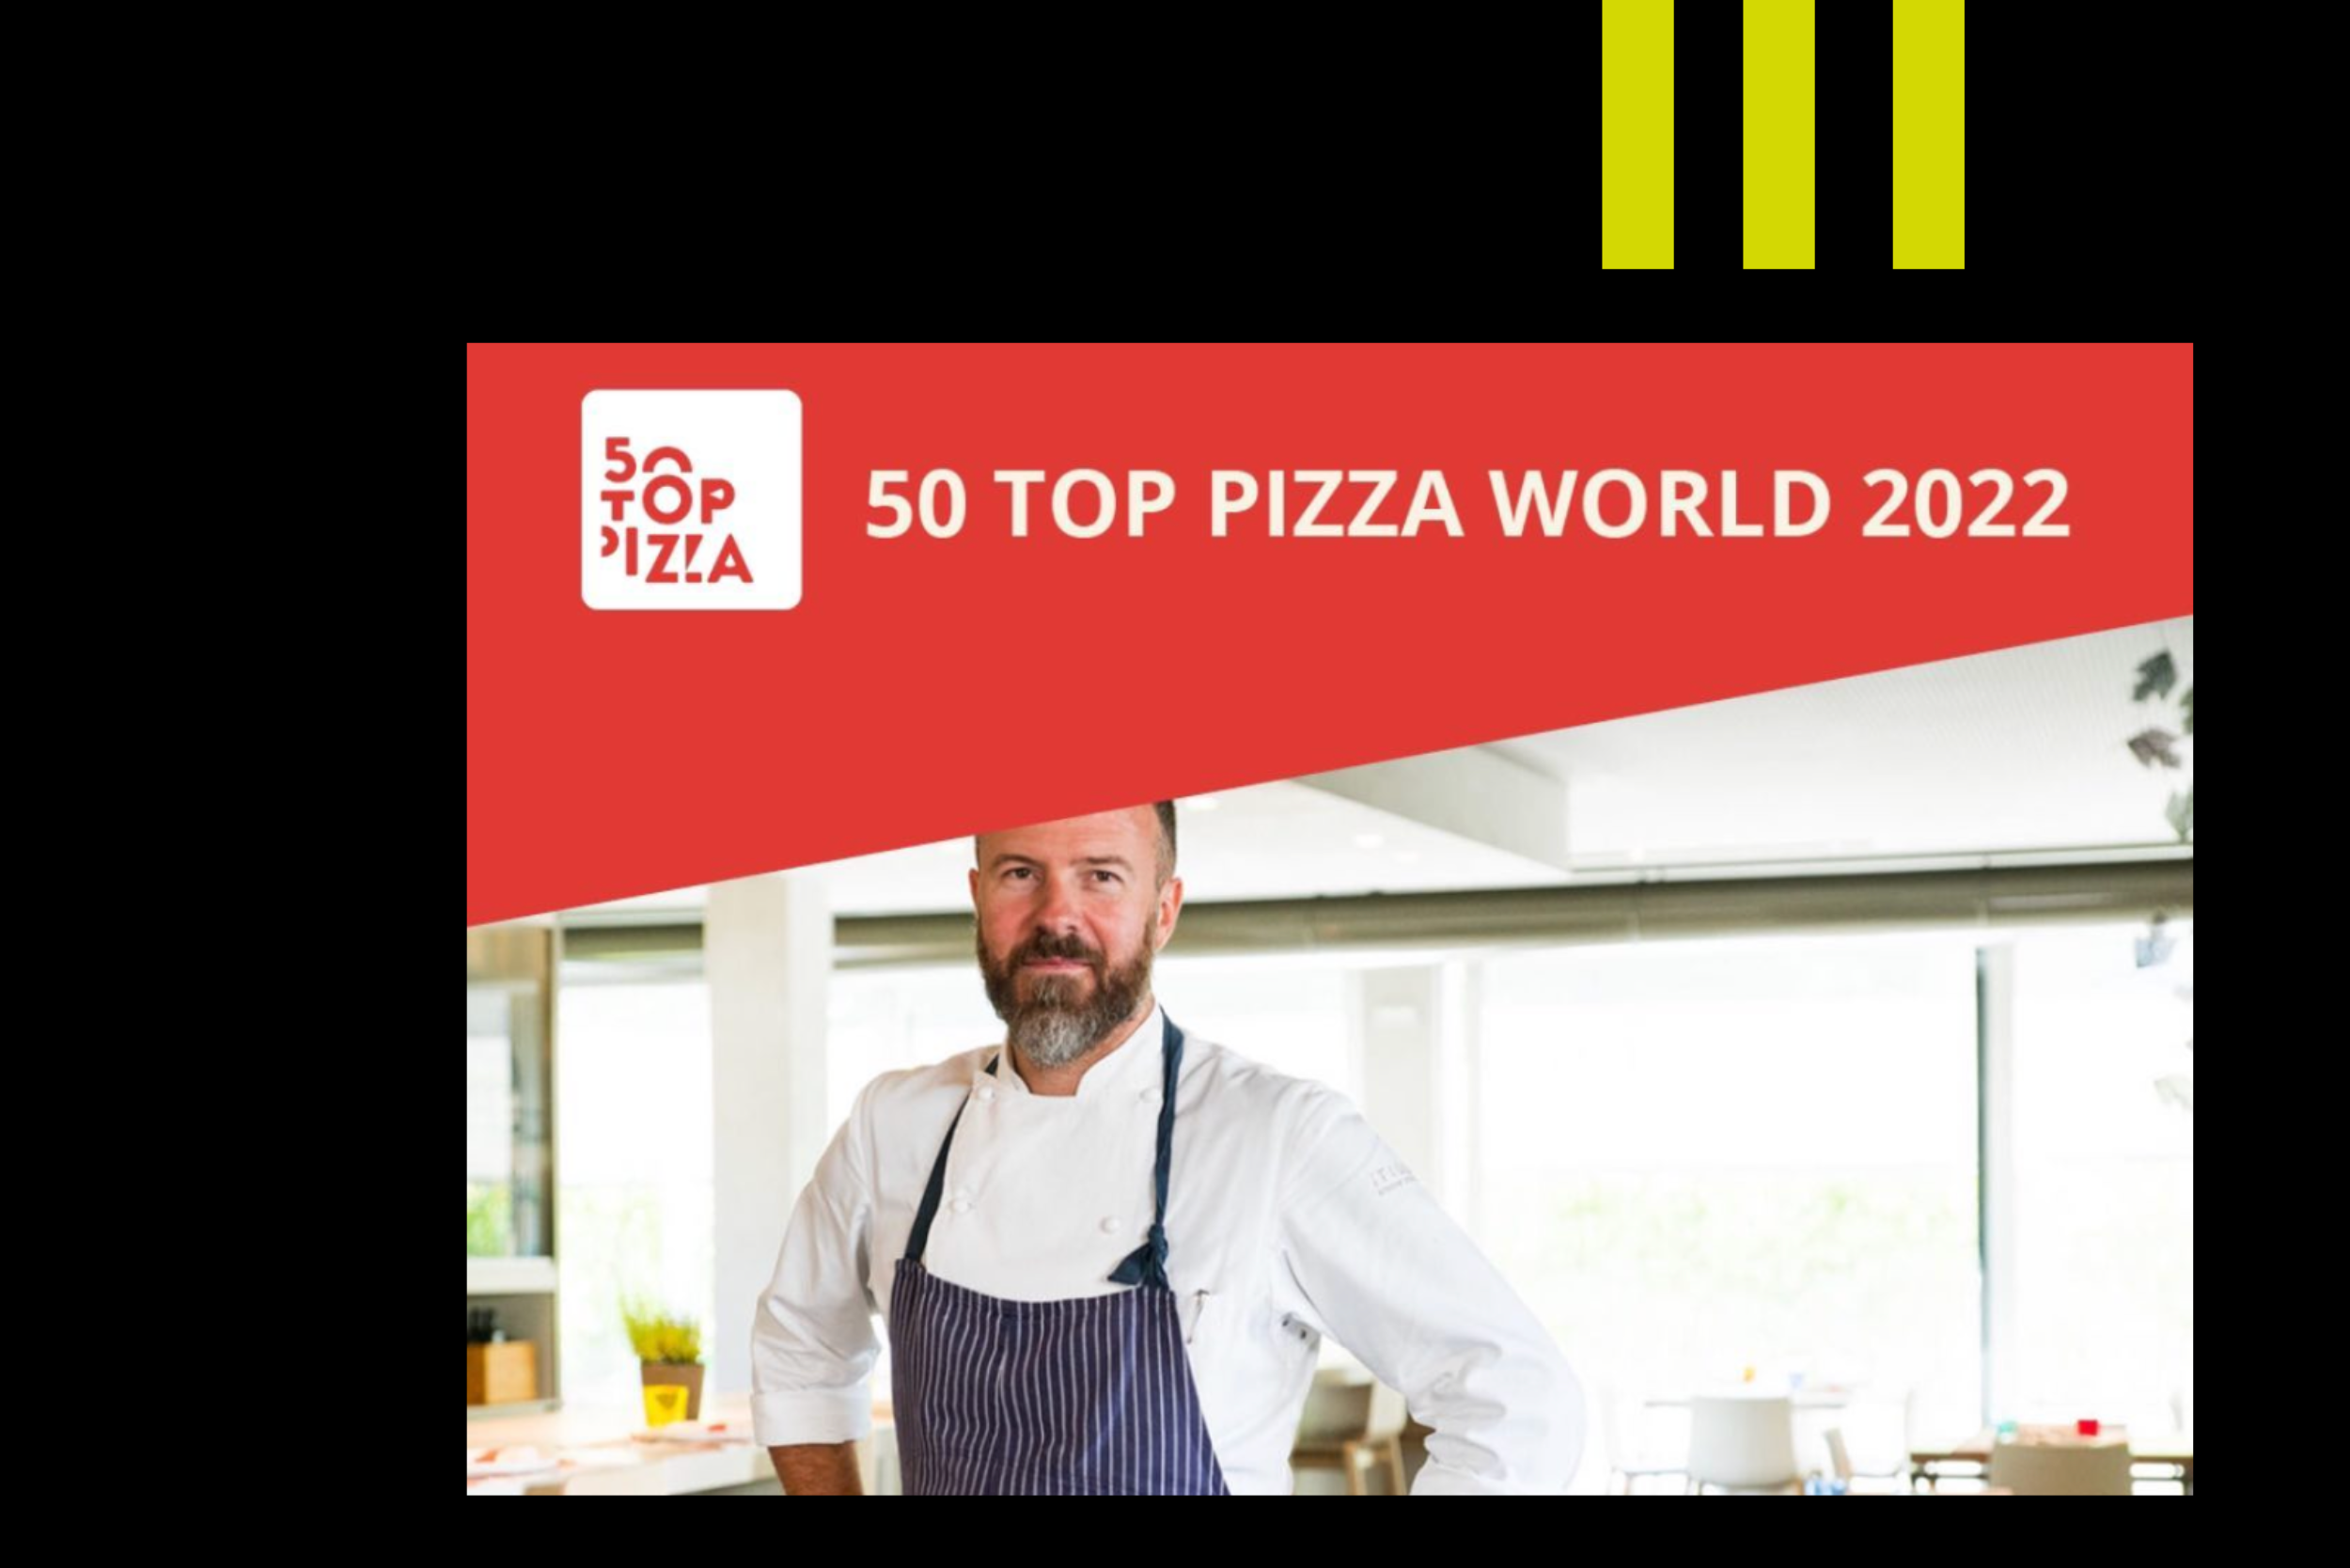 50 TOP PIZZA WORLD 2022